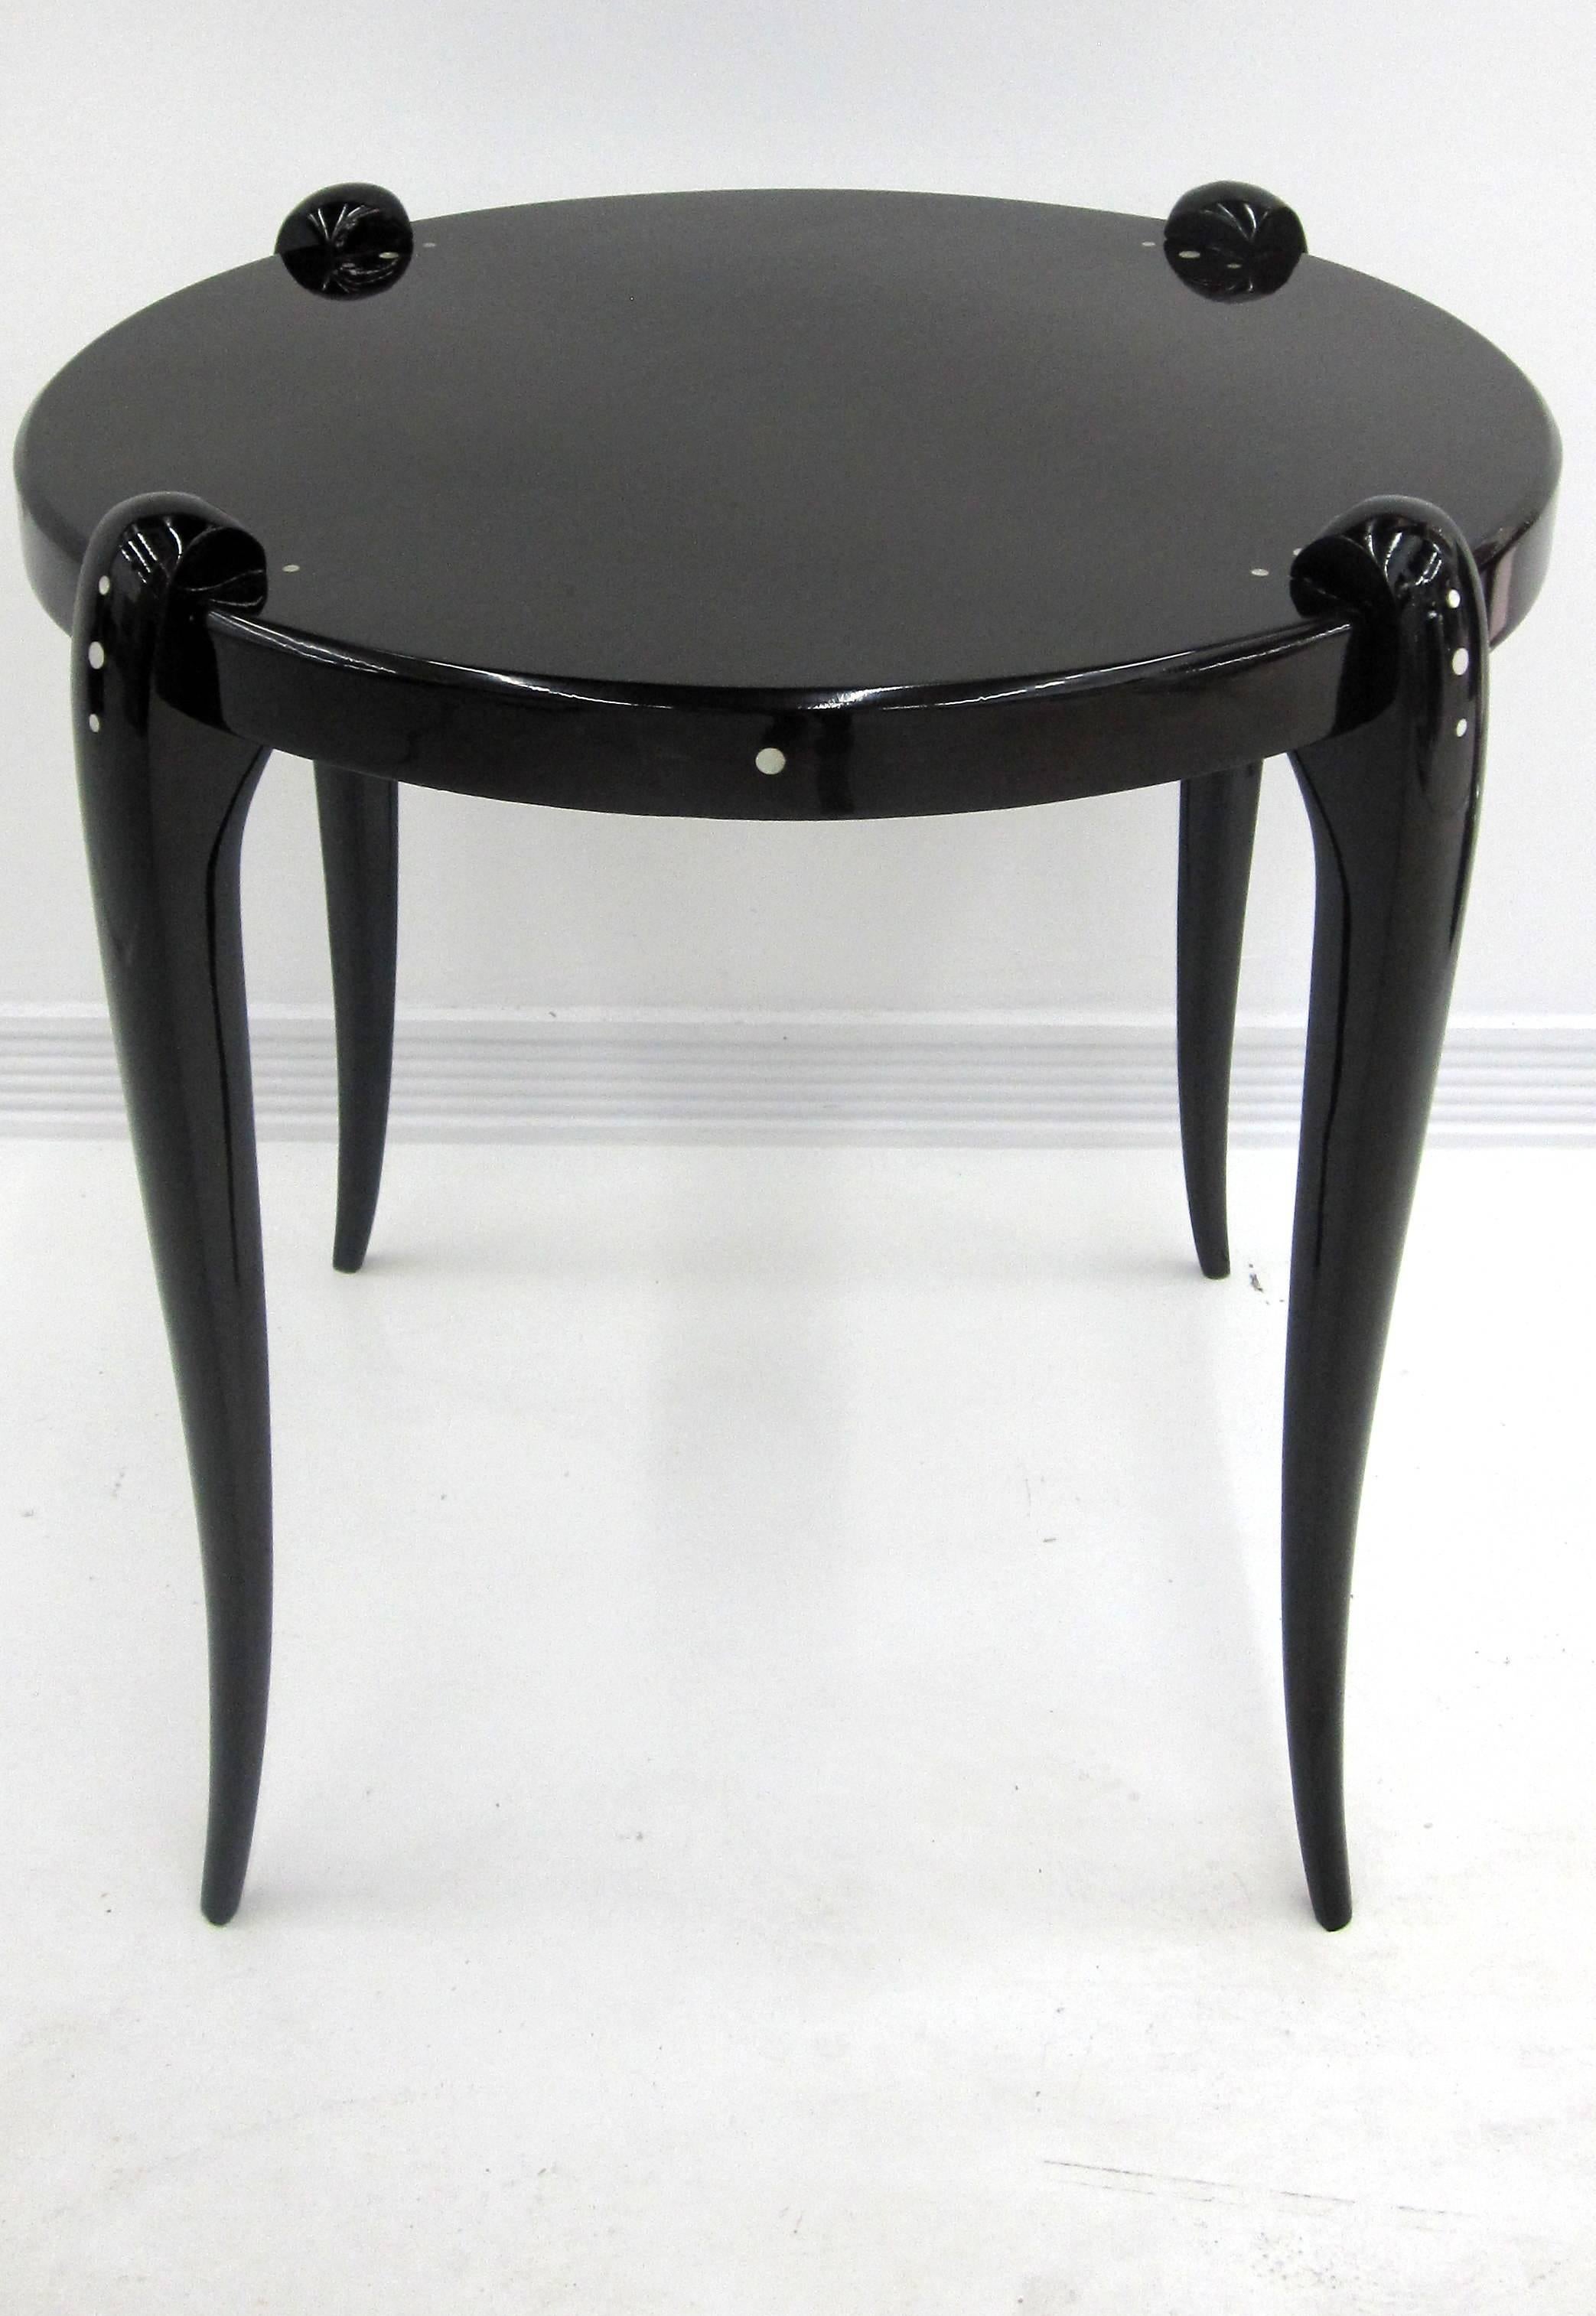  Sleek French Art Deco Table  by Jallot 1